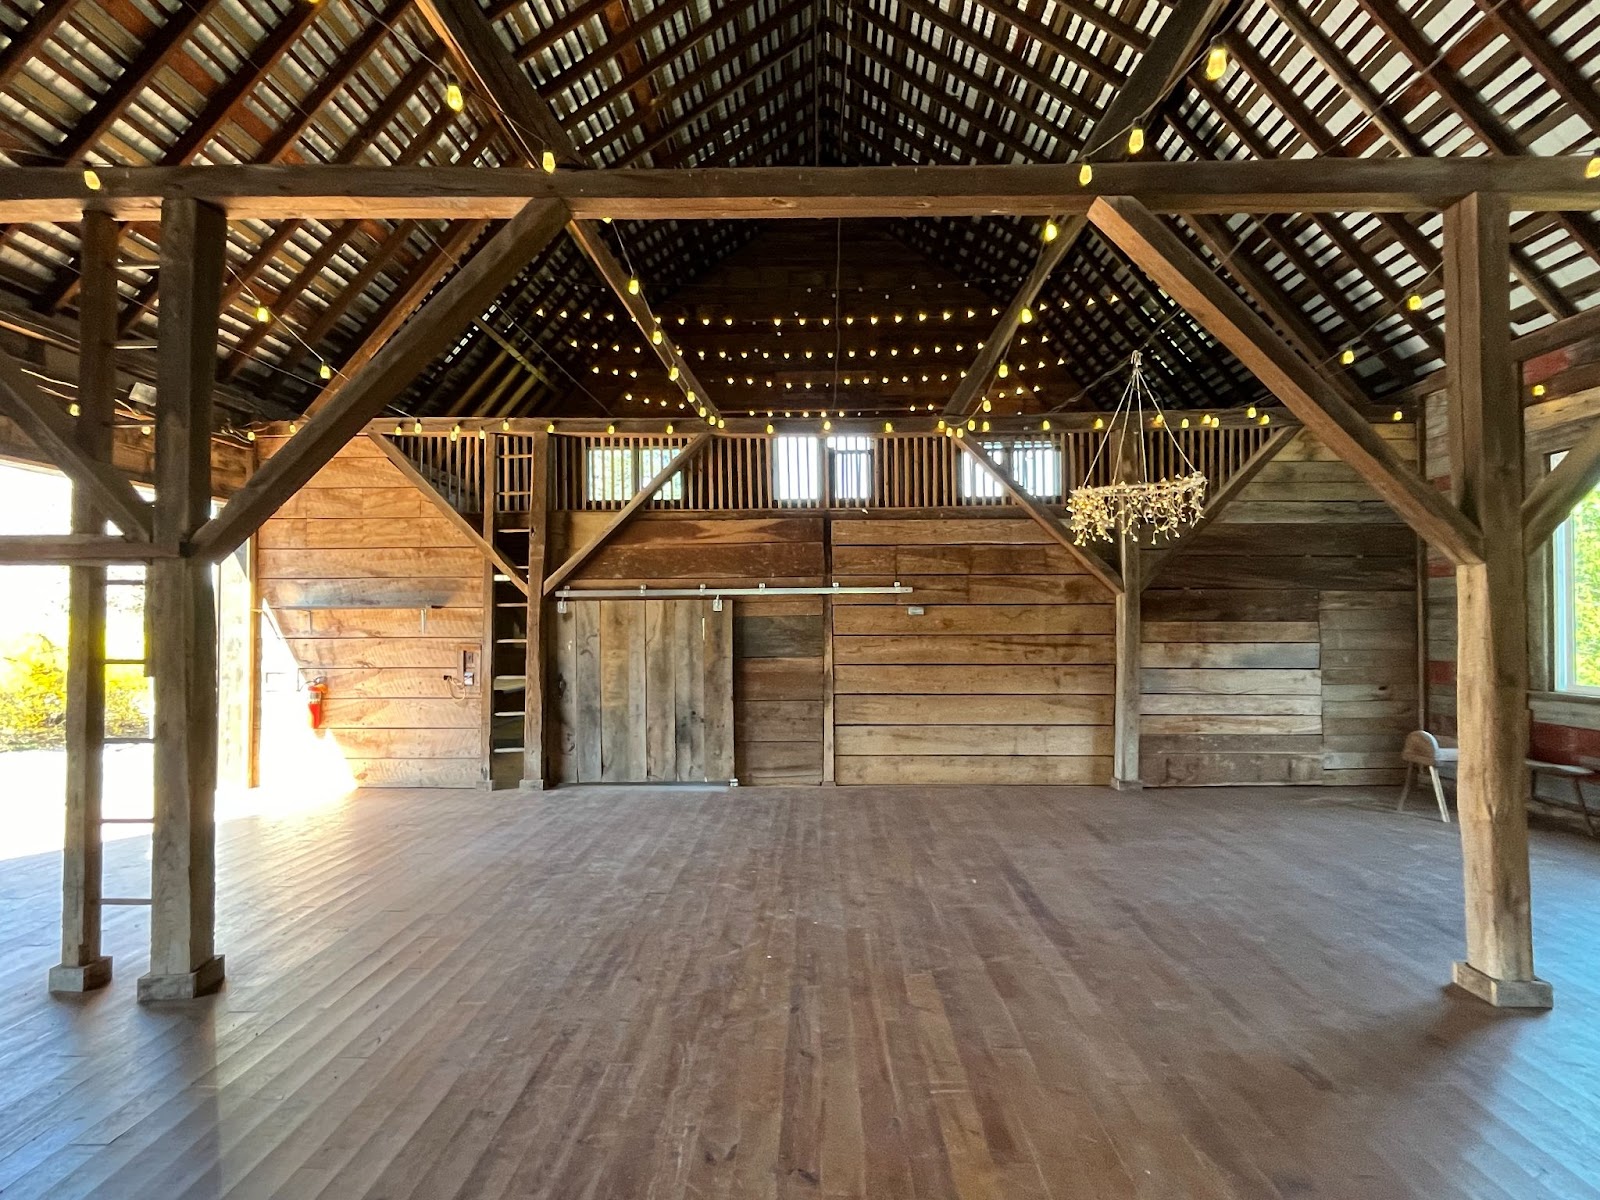 An inside view of our Homestead Barn, whose inside walls are now fully adorned with upcycled barn board.